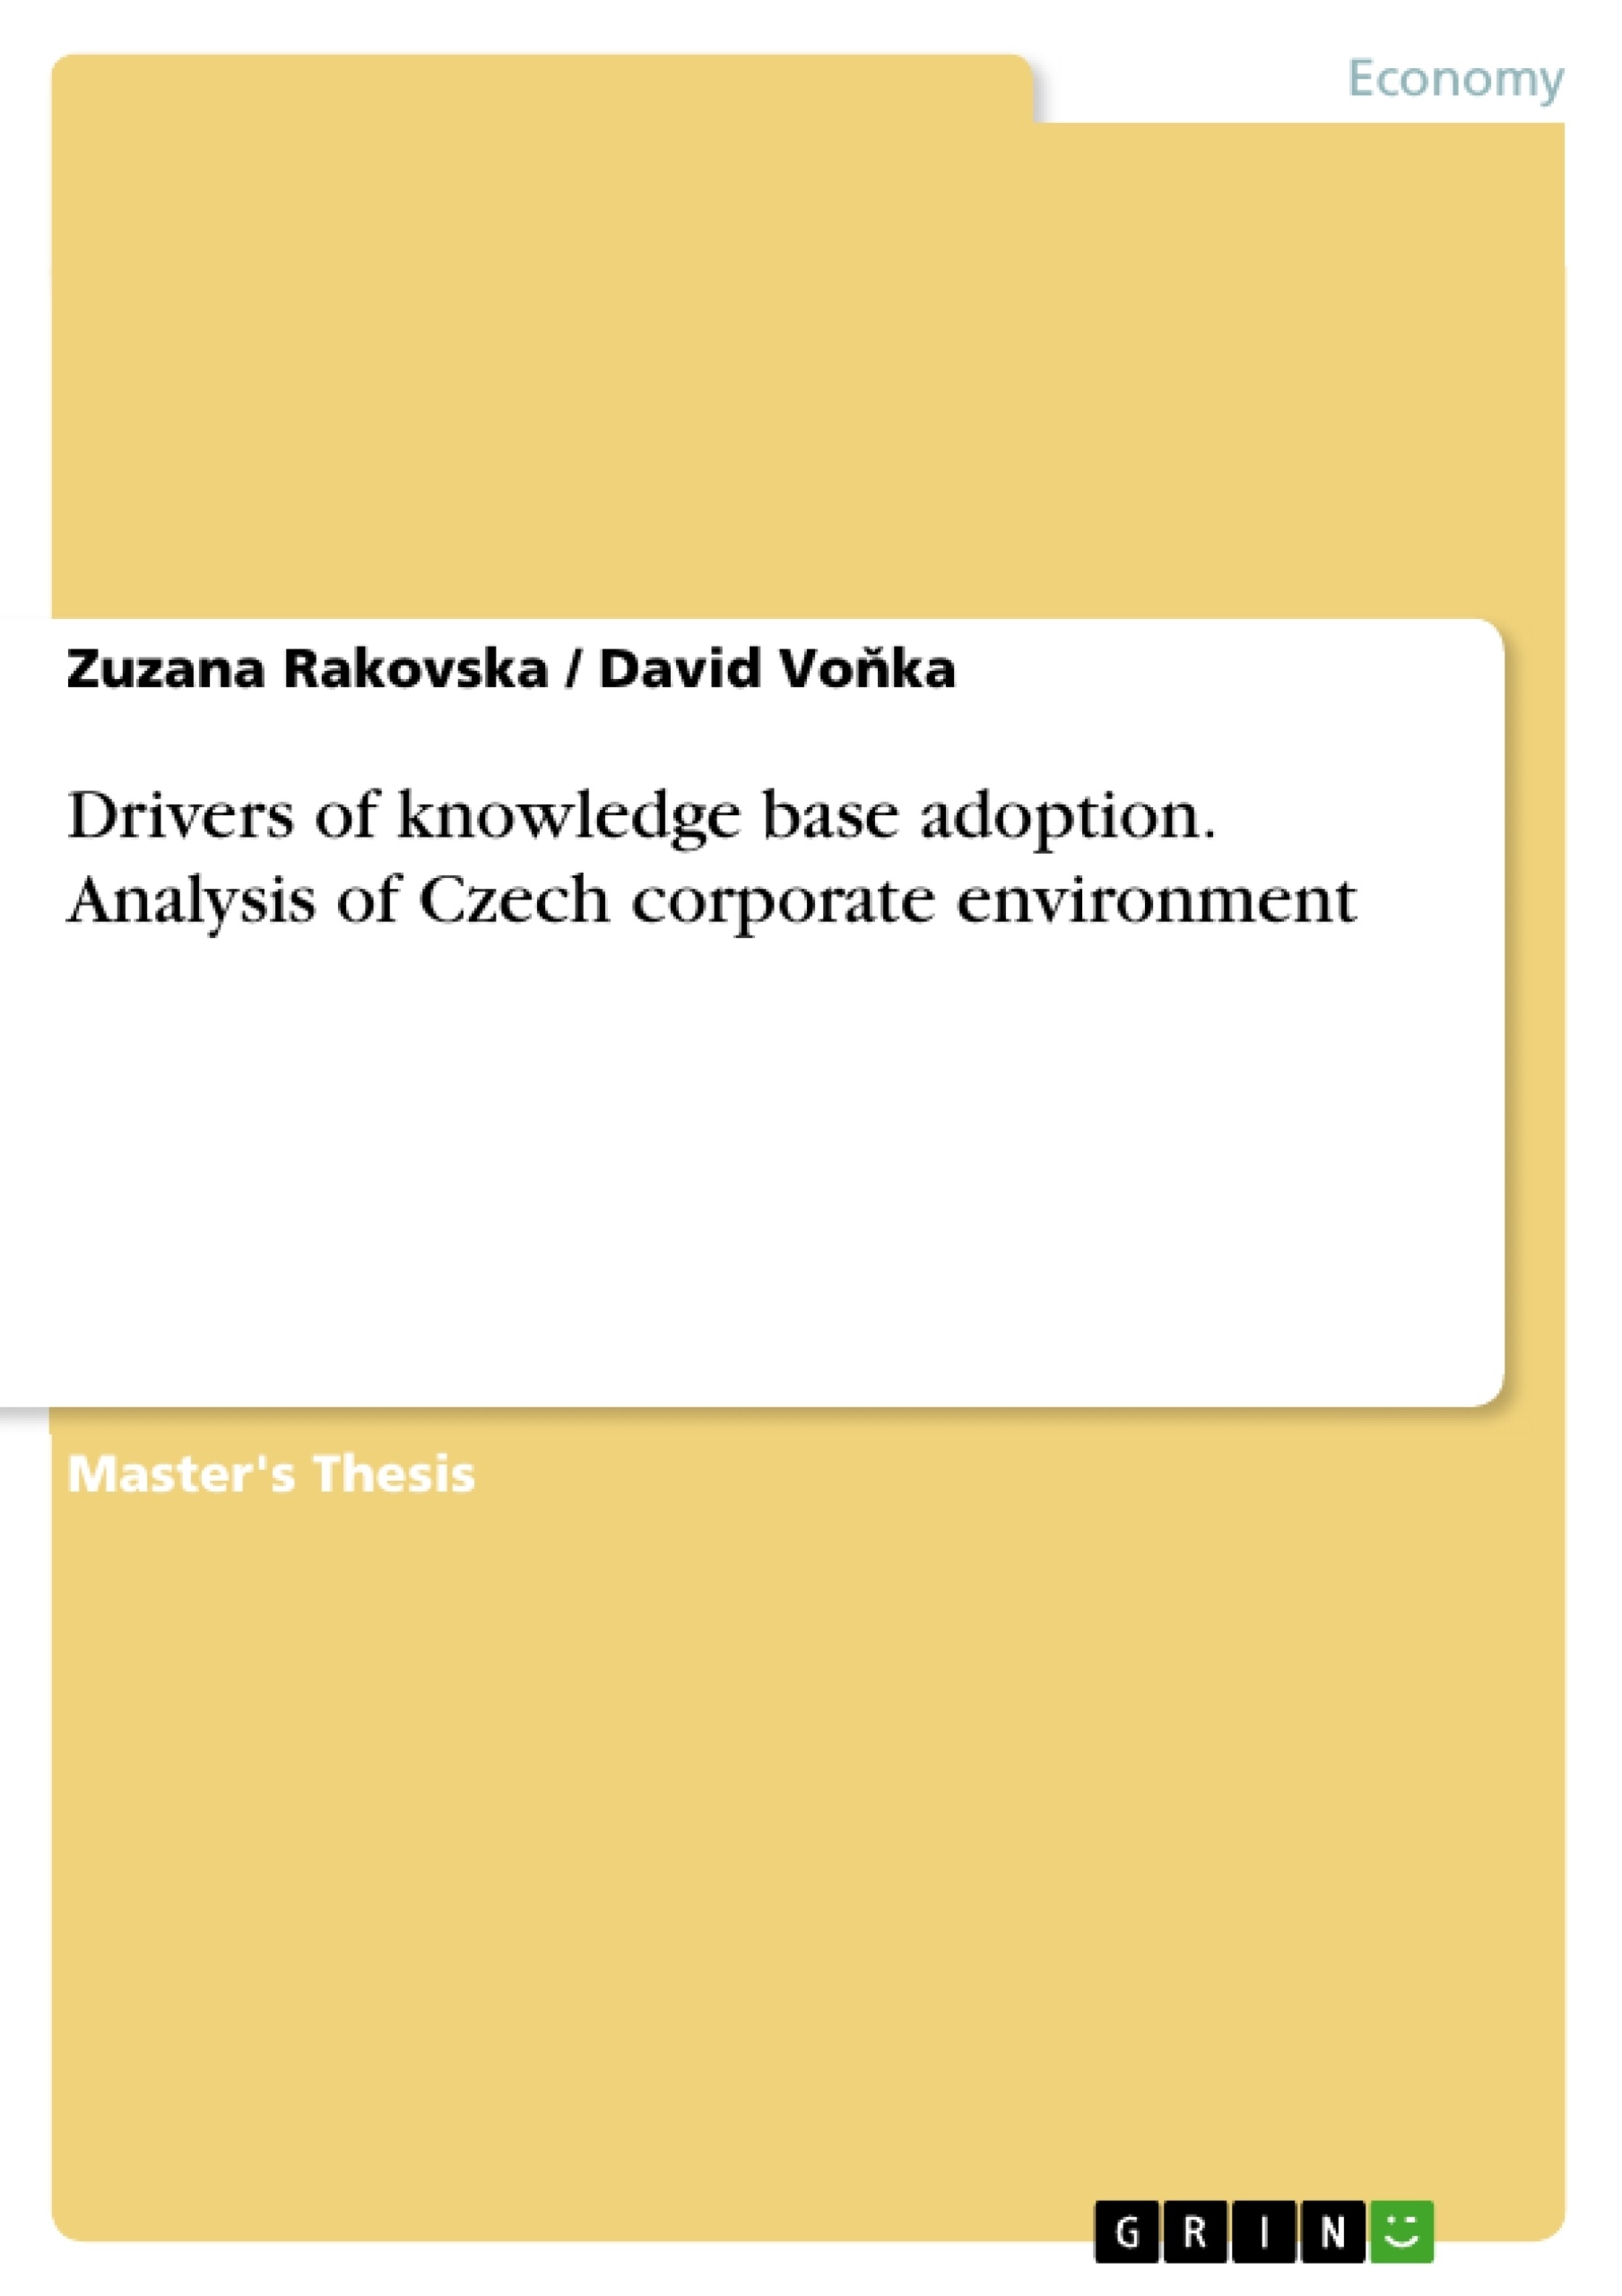 Título: Drivers of knowledge base adoption. Analysis of Czech corporate environment